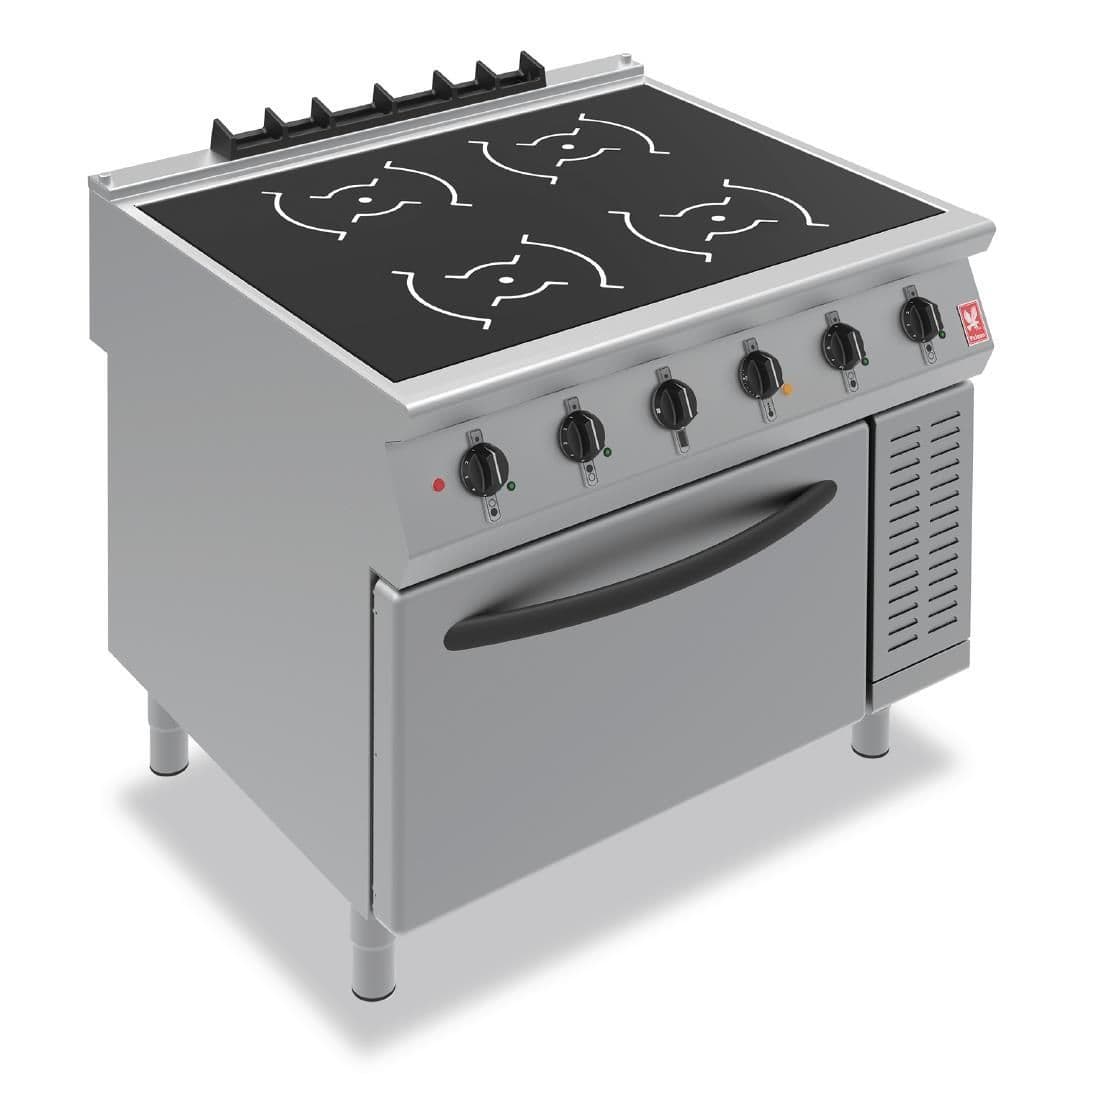 Falcon F900 Four Heat Zone Induction Range i91104 JD Catering Equipment Solutions Ltd